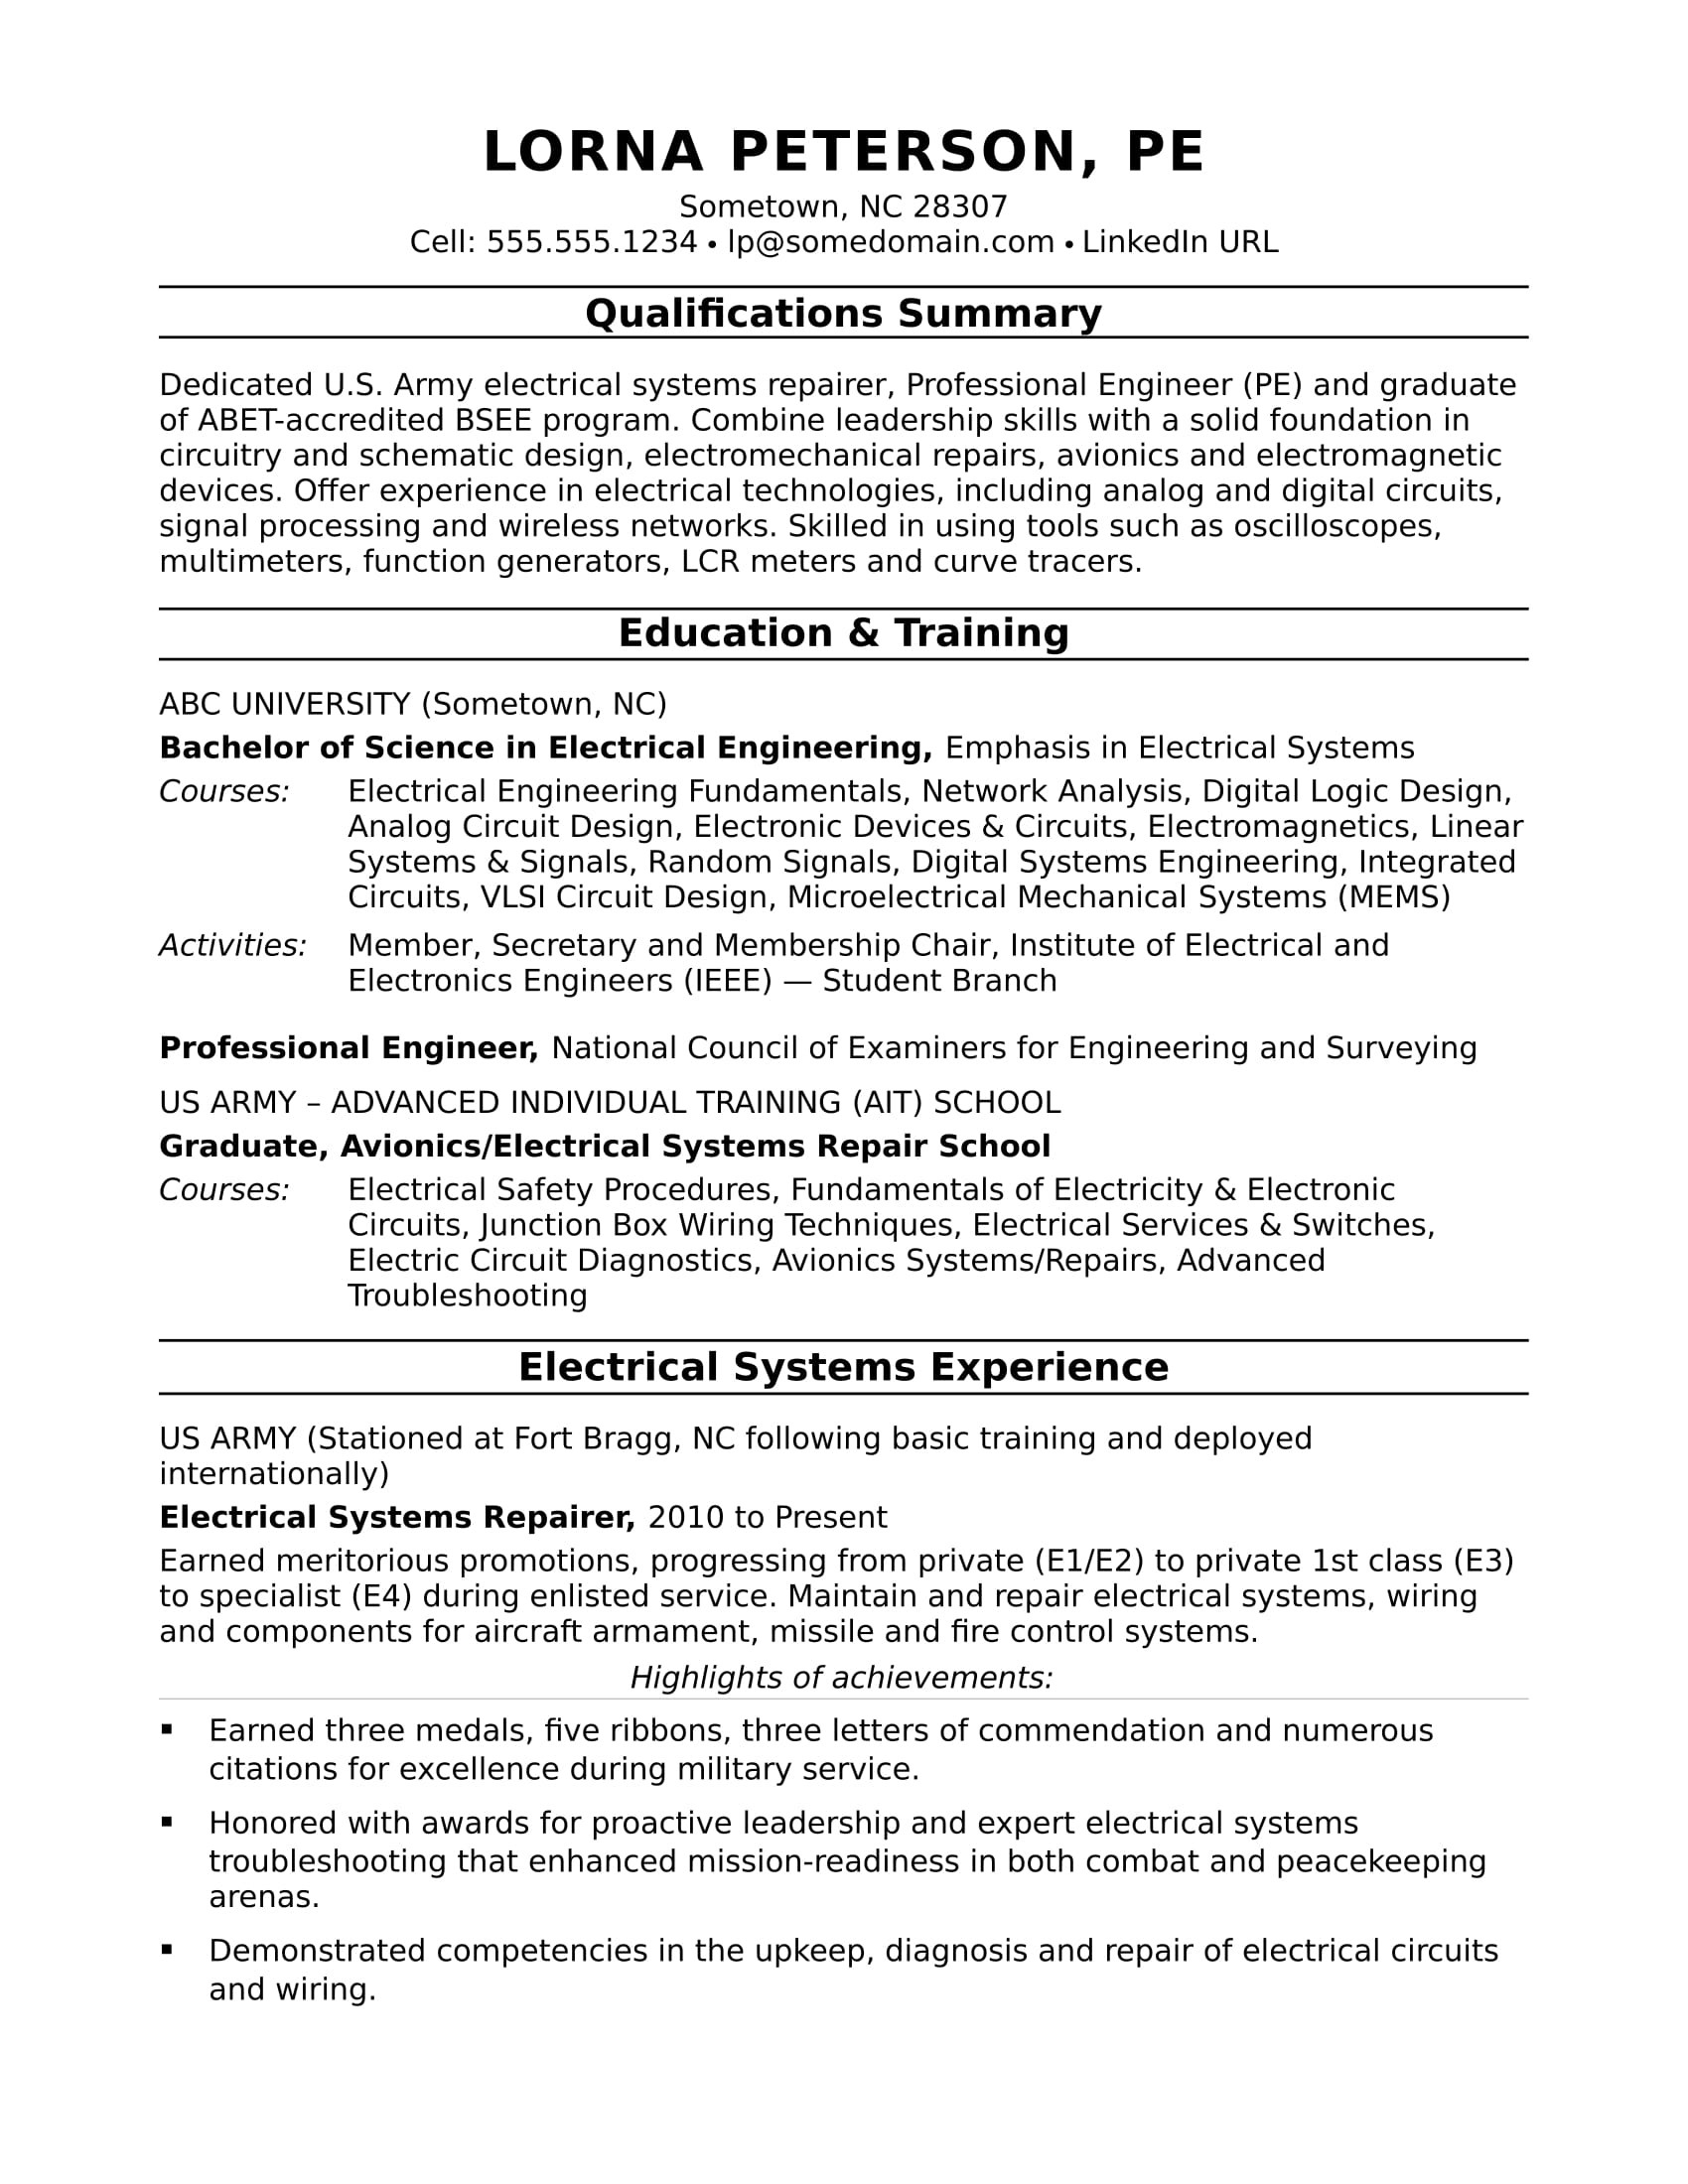 Sample Resume for Electrical Engineering Student Sample Resume for A Midlevel Electrical Engineer